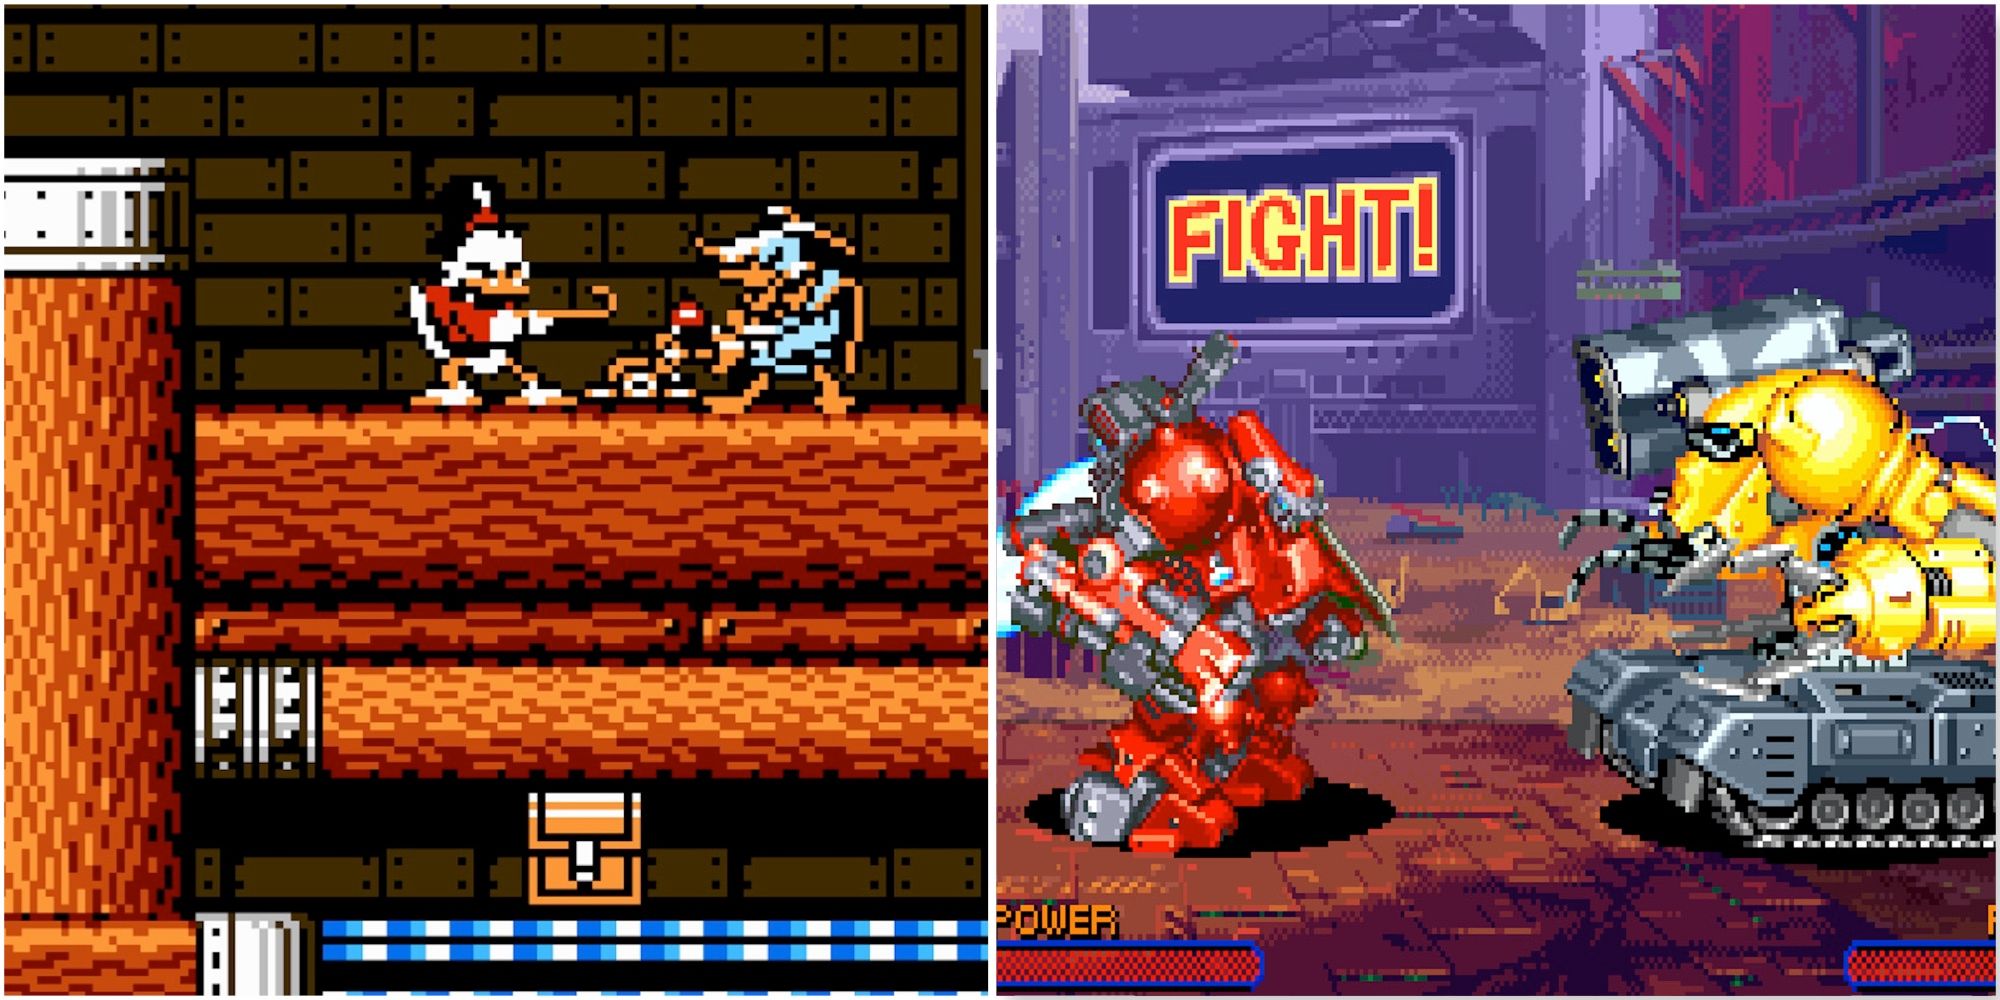 Fighting enemies in DuckTales 2 and Playing a match in Cyberbots Full Metal Madness